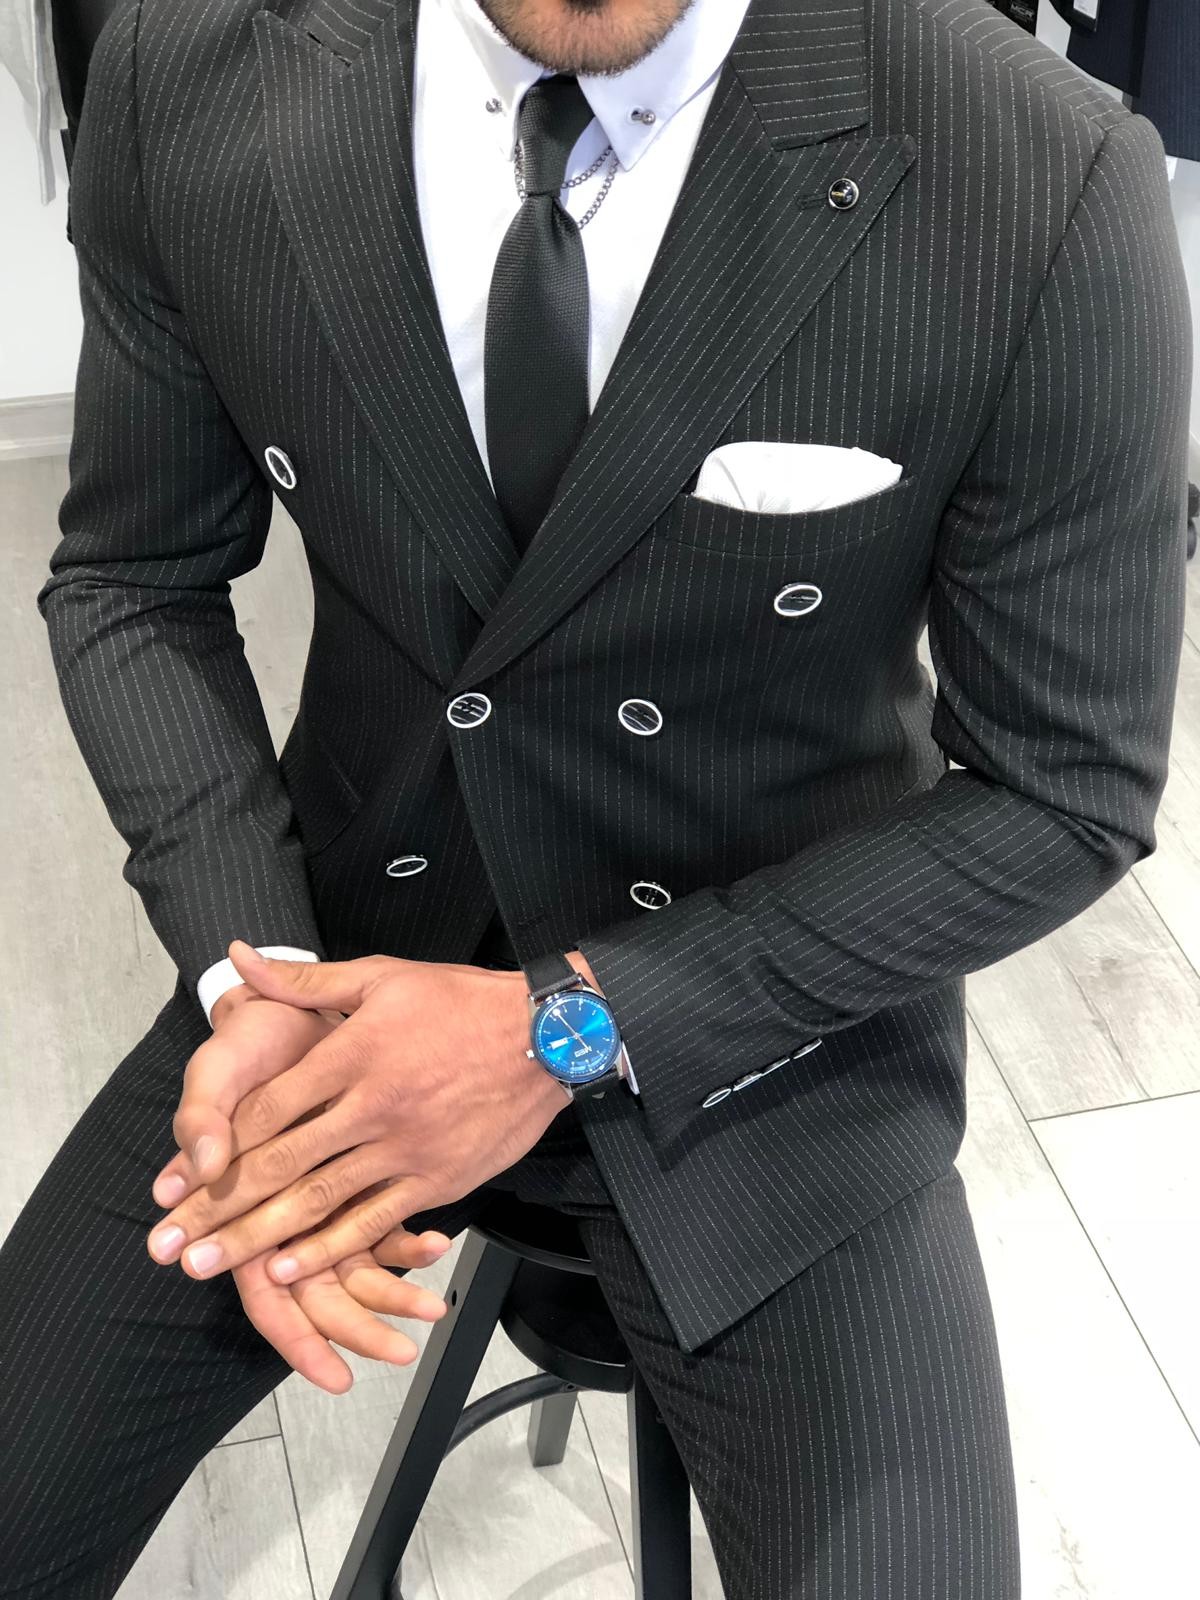 https://gentwith.com/wp-content/uploads/2018/12/Slim-Fit-Striped-Double-Breasted-Suit-Black.jpeg